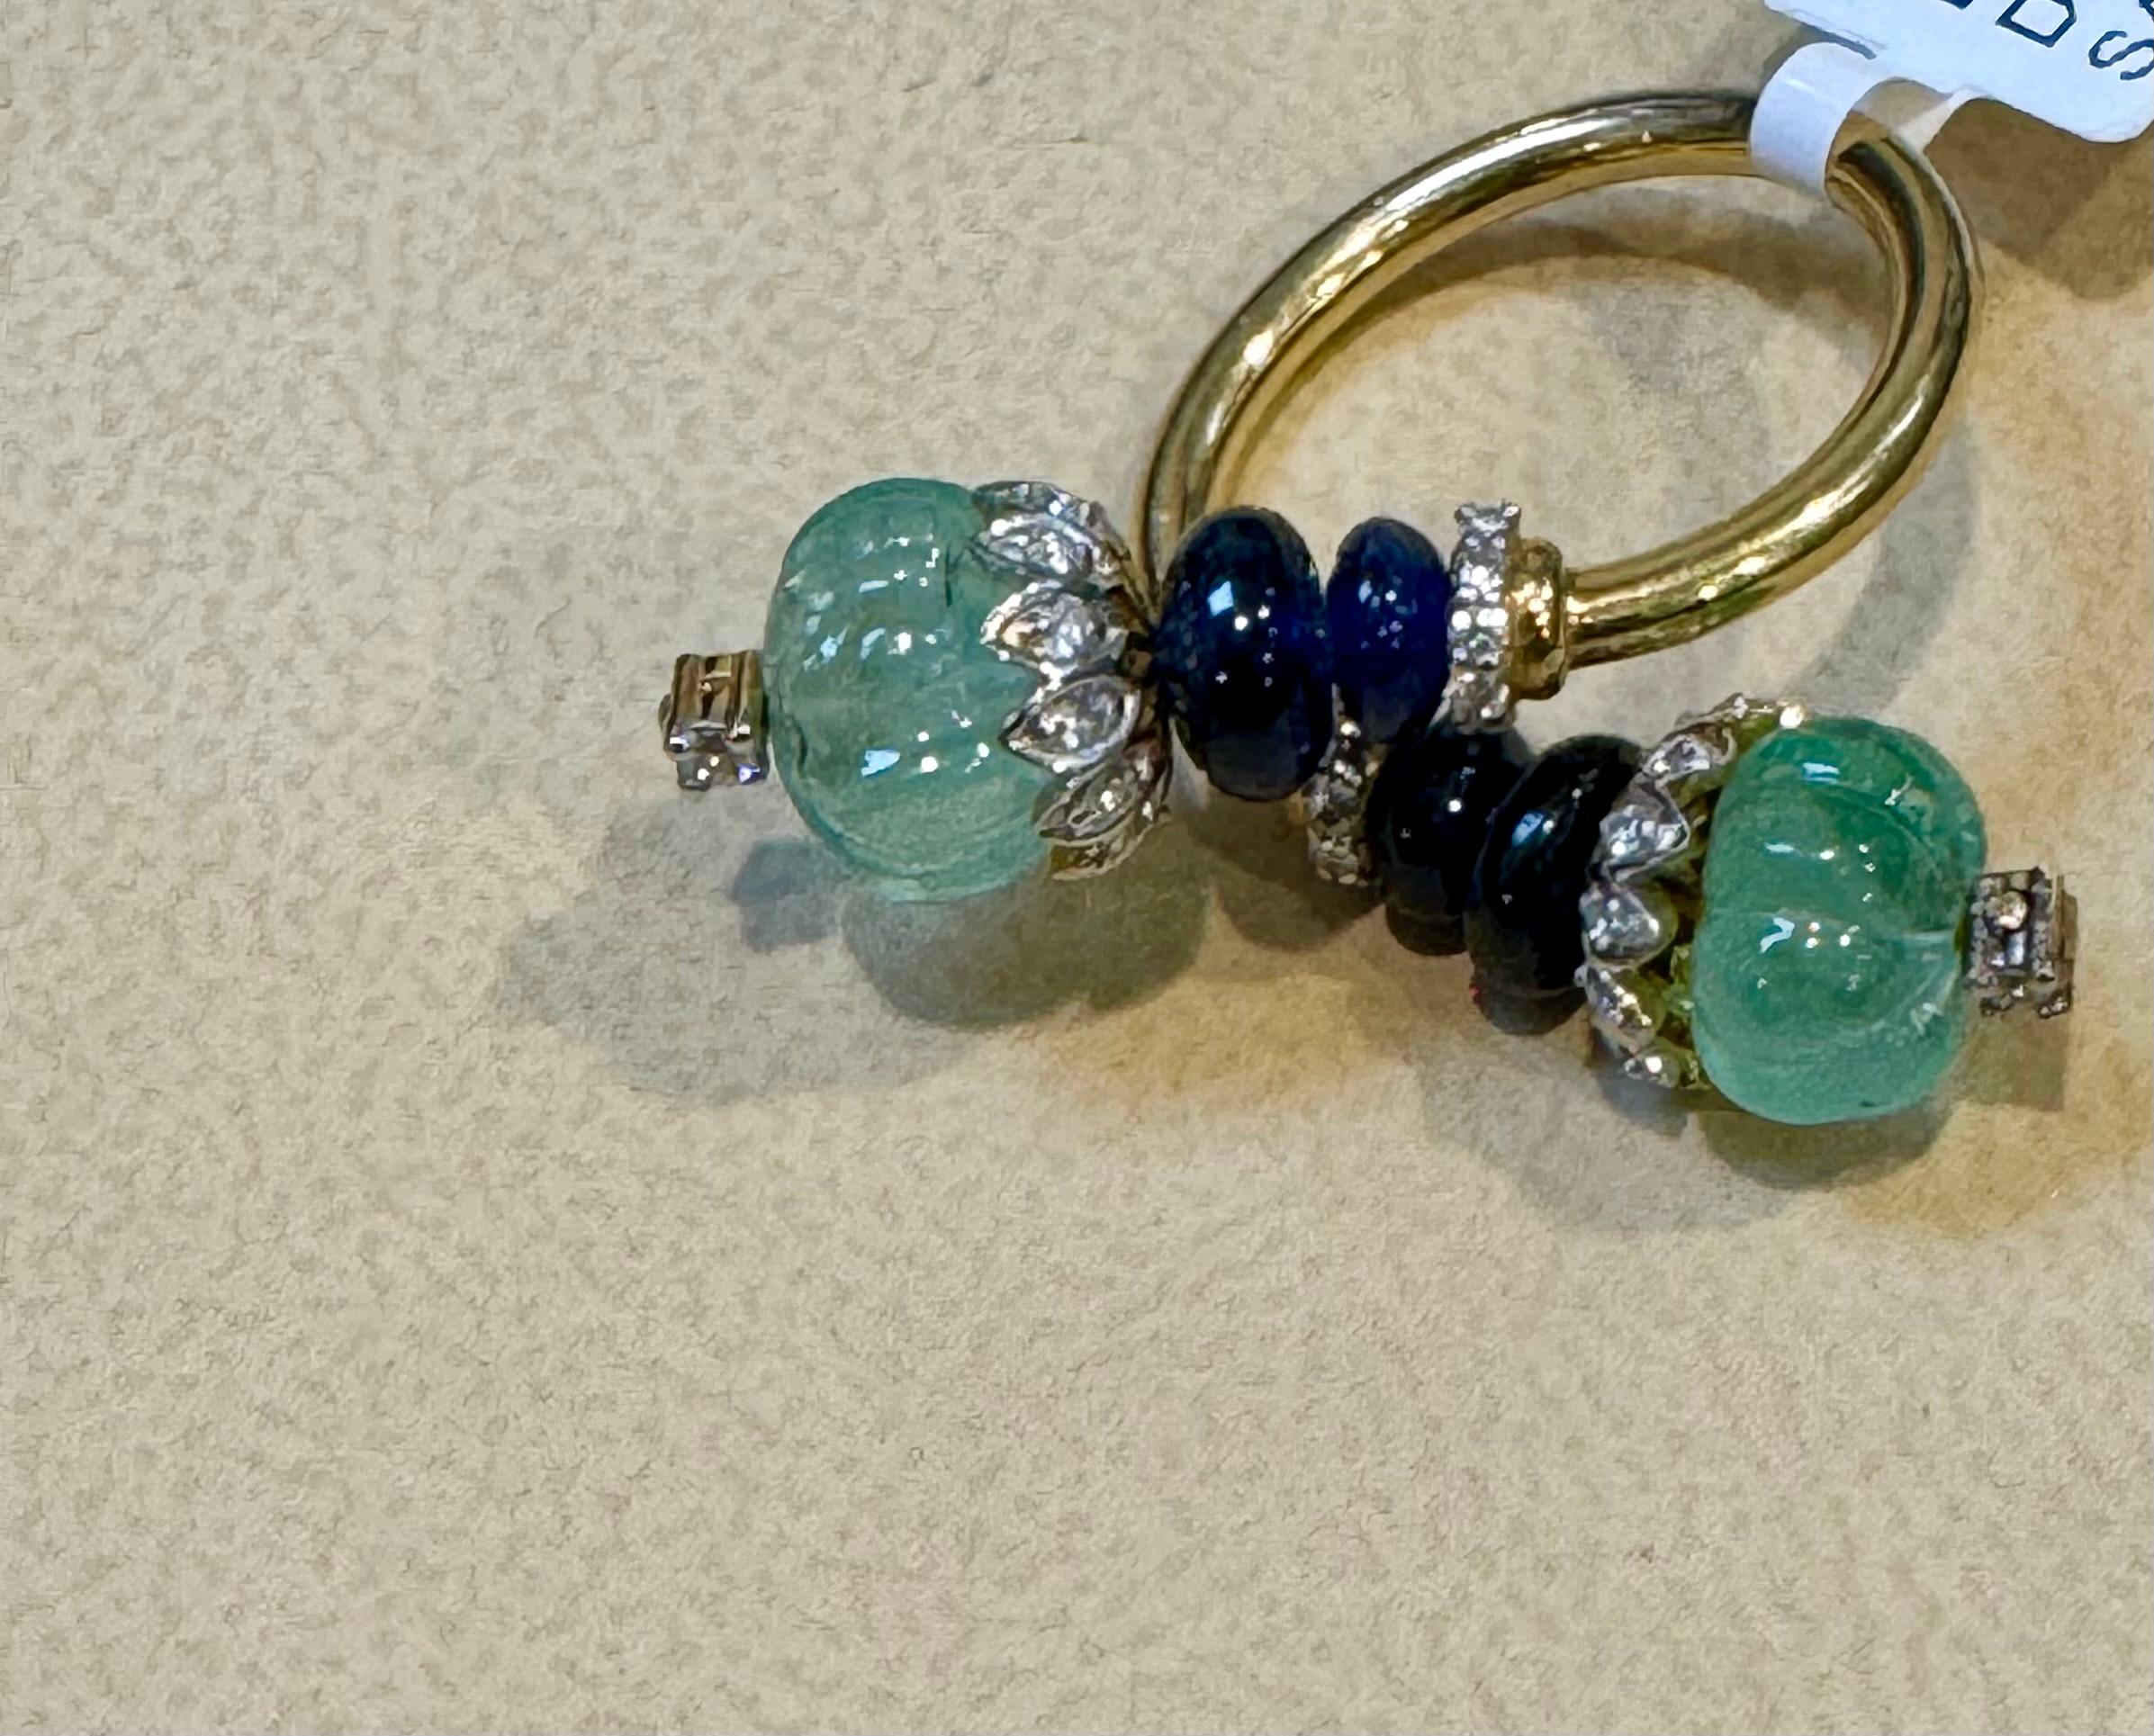 5 Ct Emerald Bead & 2.5 Ct Sapphire Beads & Diamond Ring in 18 Kt Gold Size 5 2